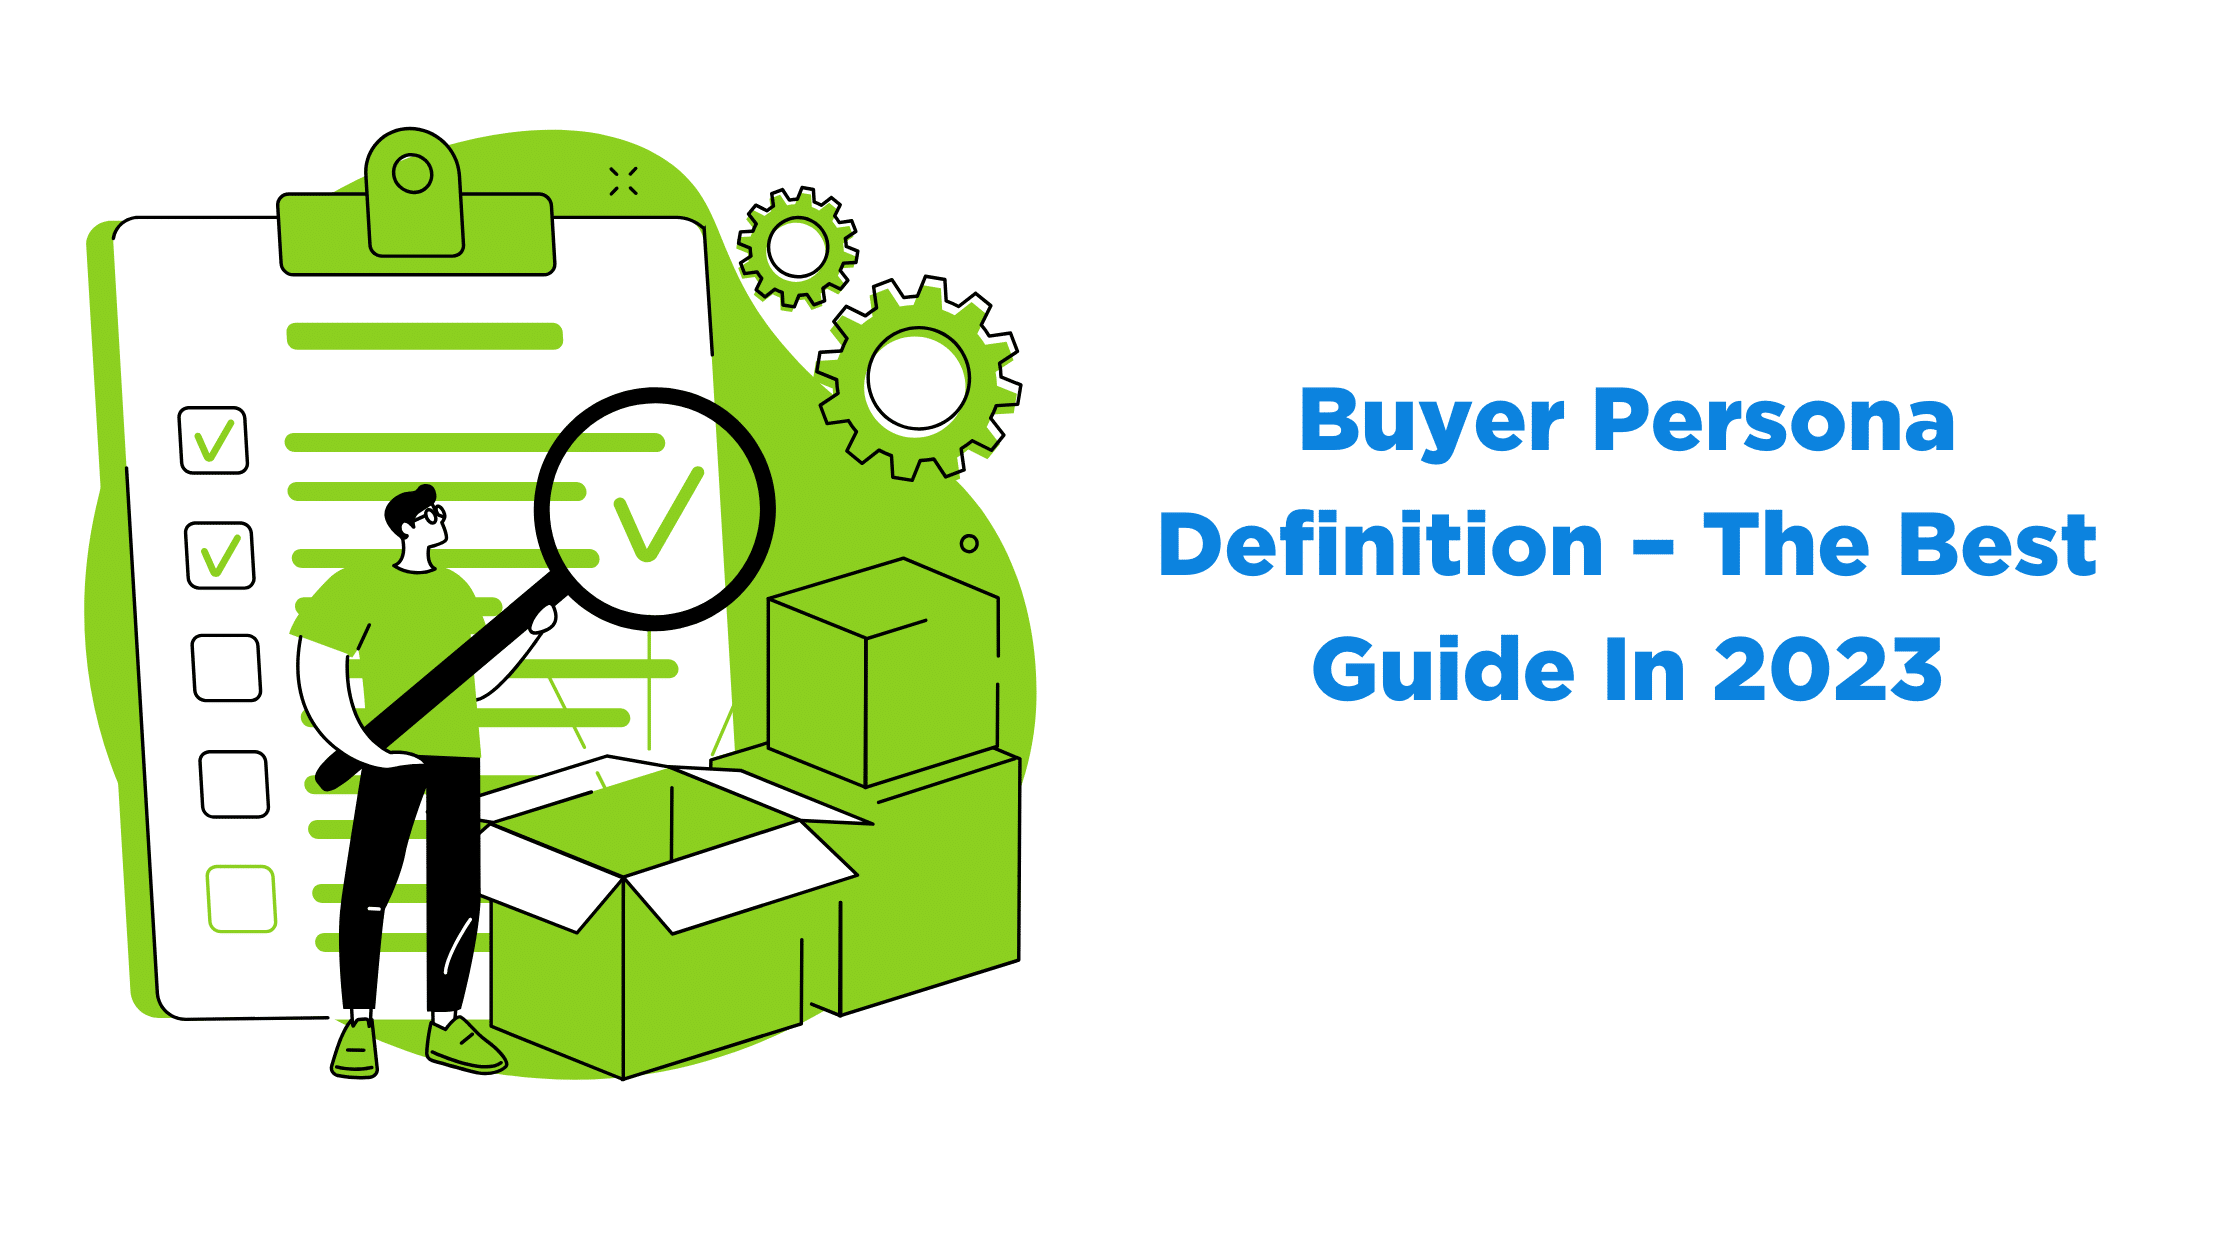 Buyer Persona Definition – The Best Guide In 2023